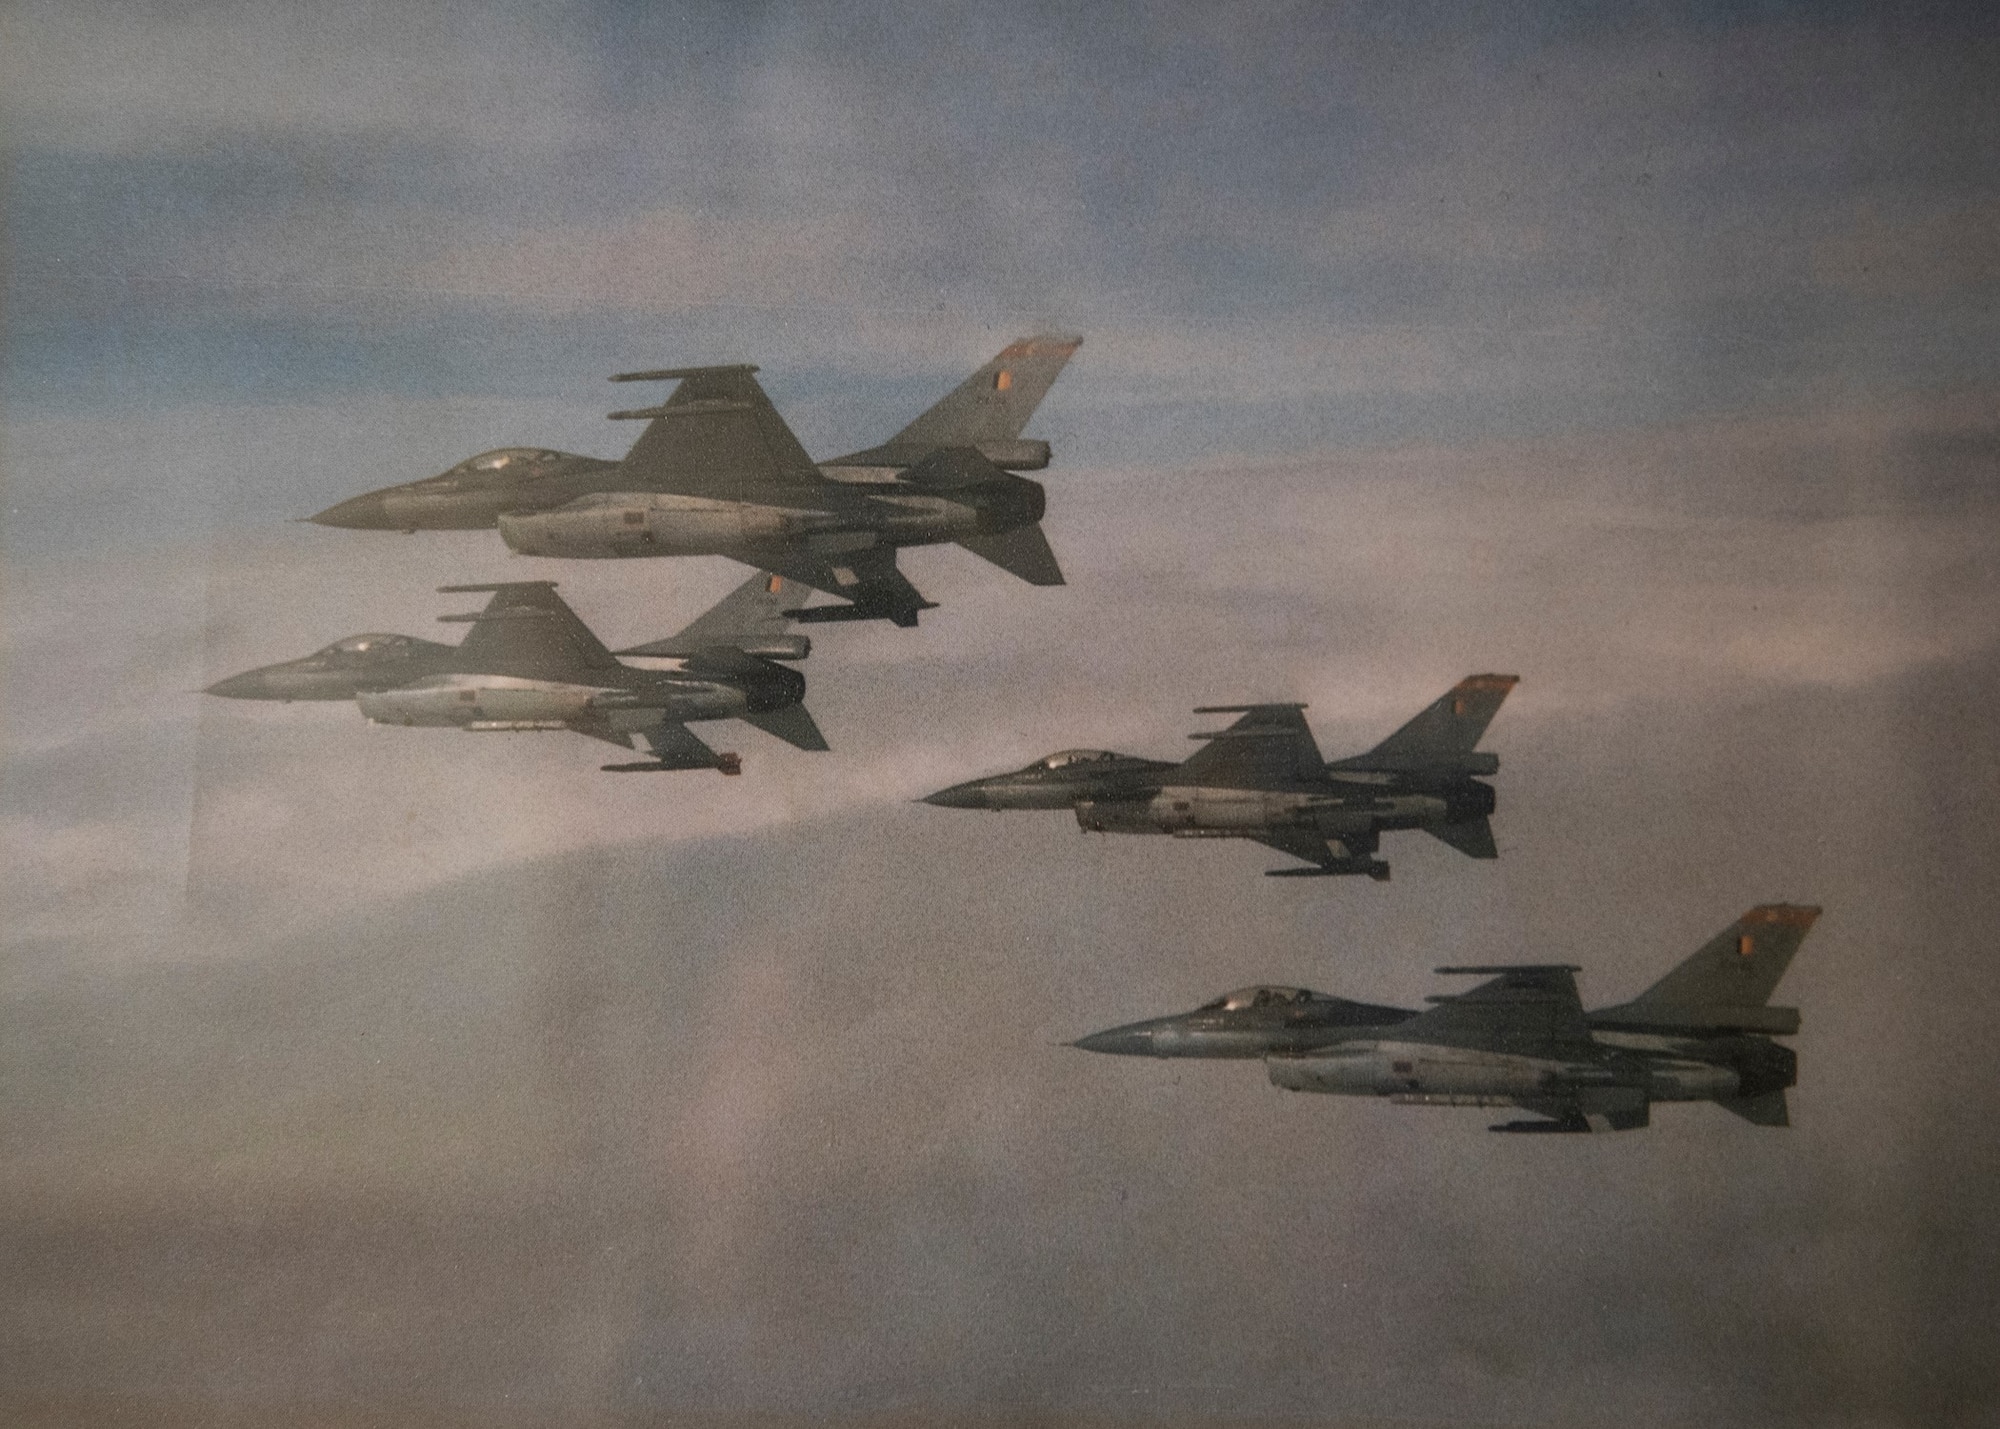 Four Belgian F-16s fly in formation.